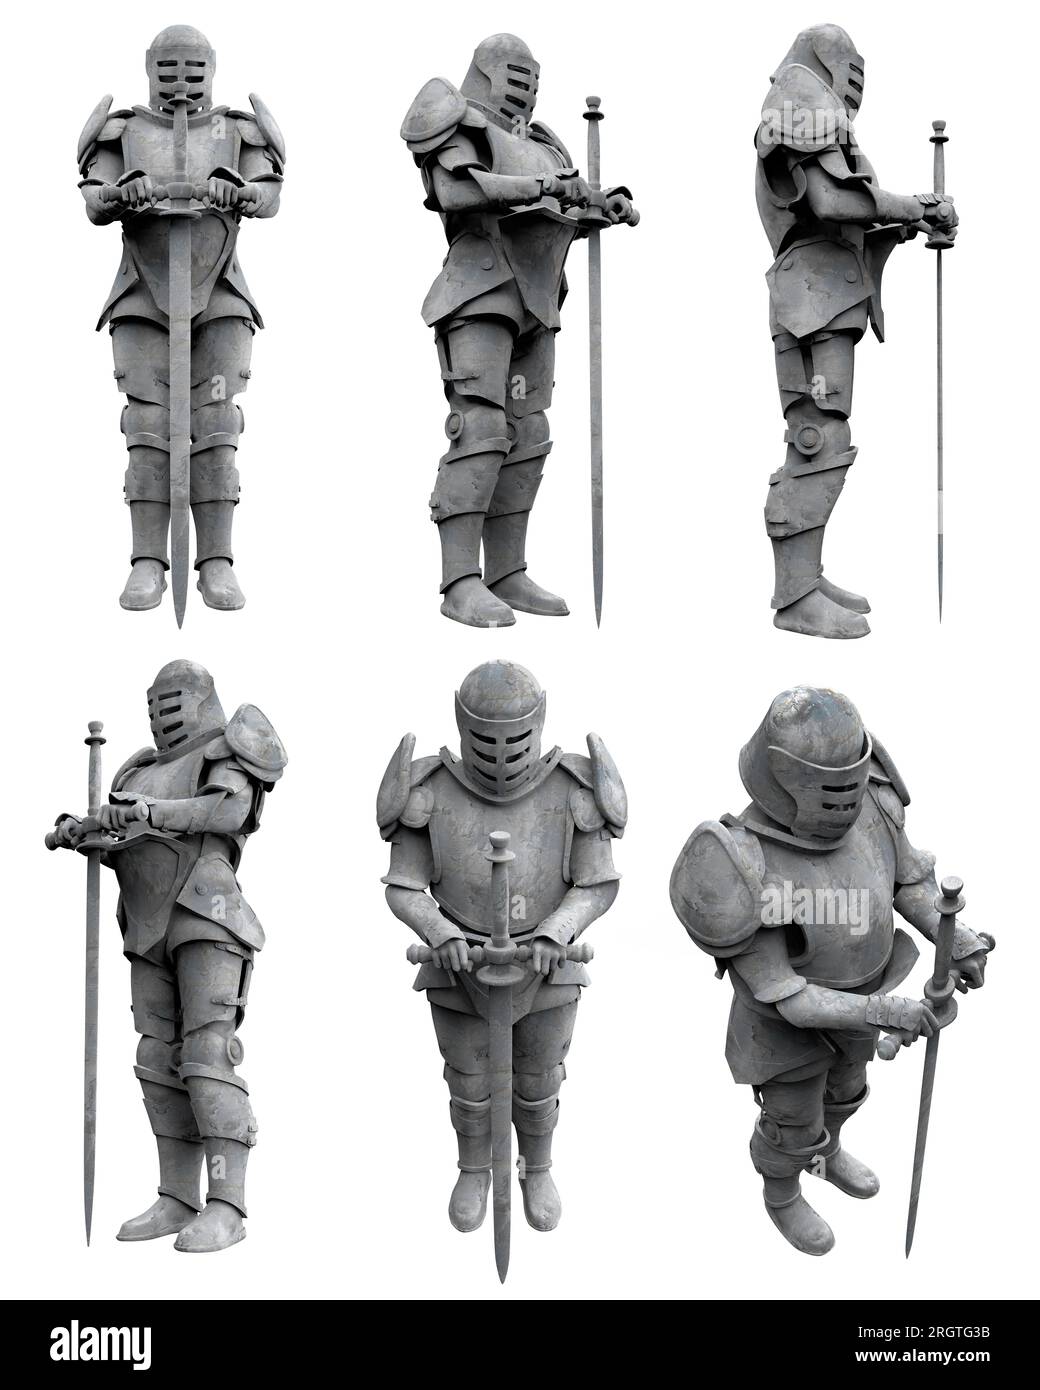 Isolated 3d render illustration of stone sentinel or guardian medieval armored knight statue with sword in various angles. Stock Photo